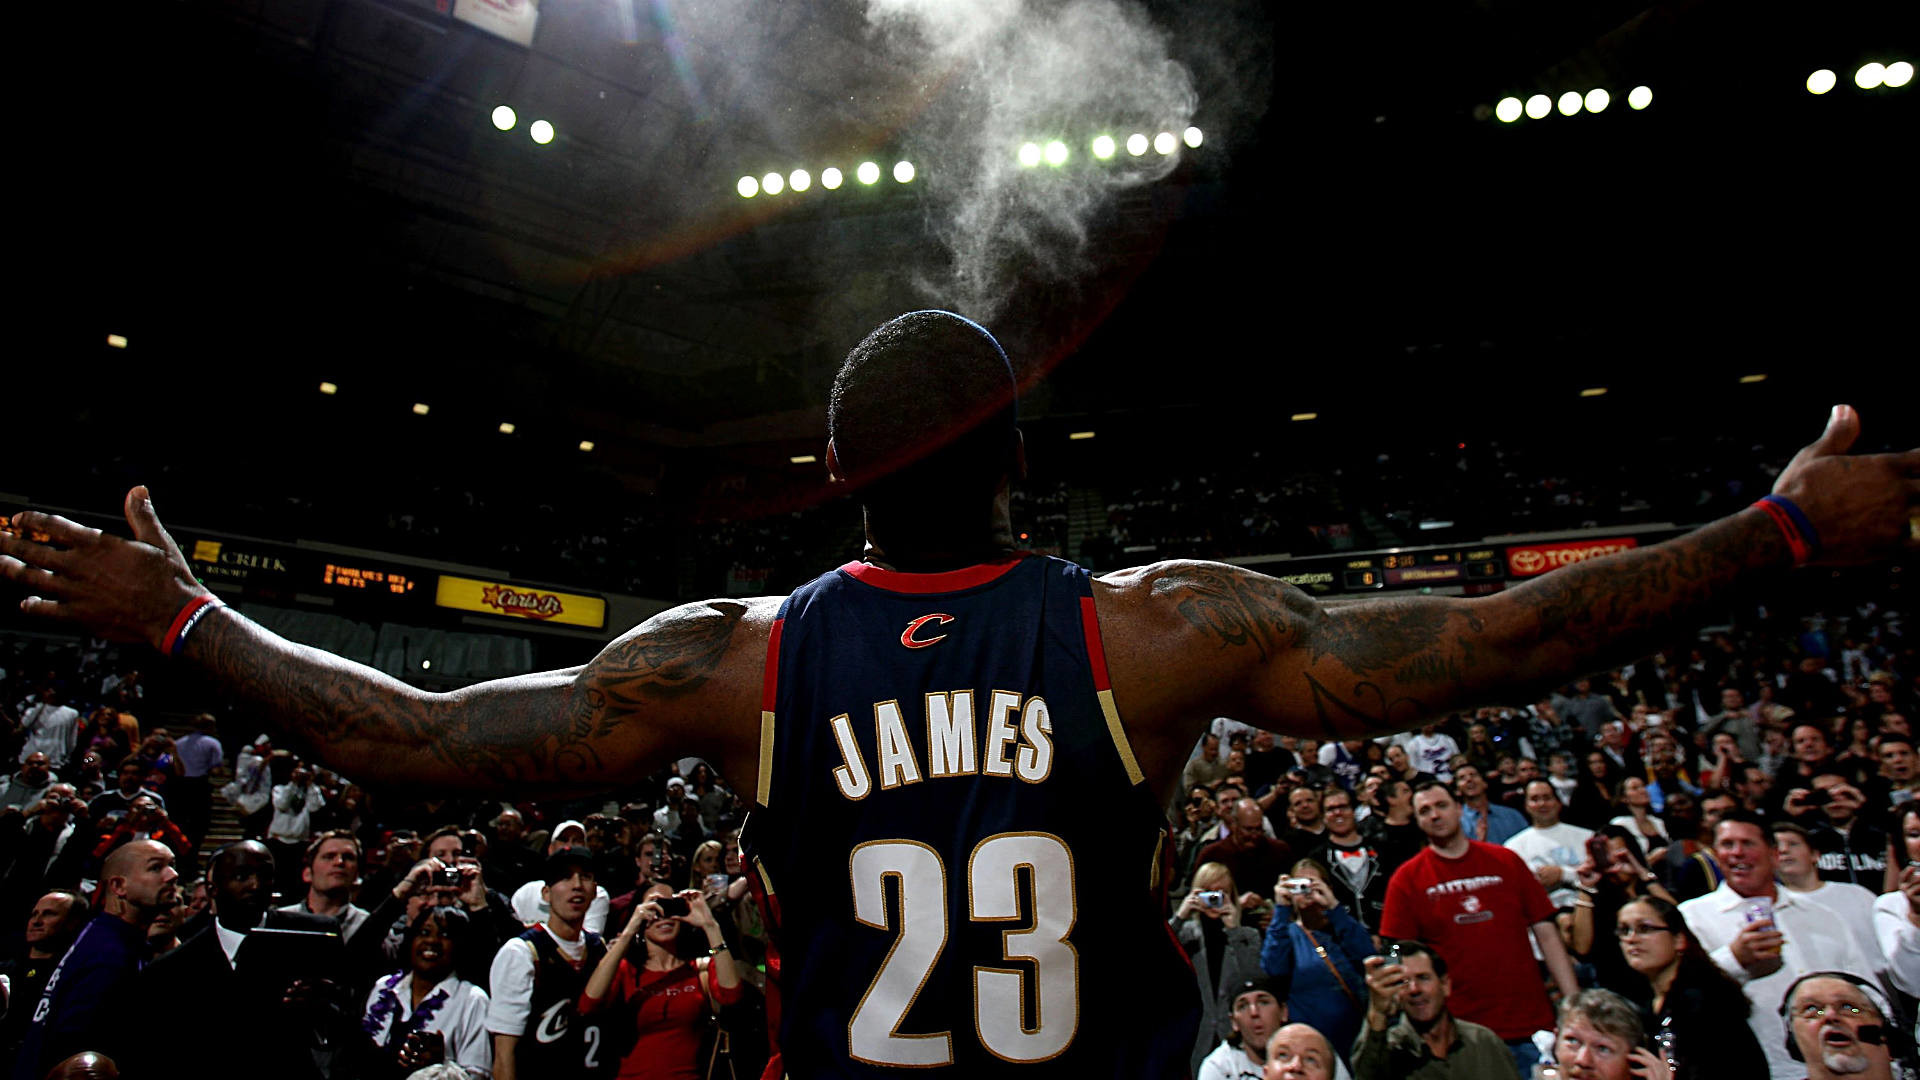 1920x1080 Lebron James Wallpaper NBA Sports Wallpapers in jpg format for